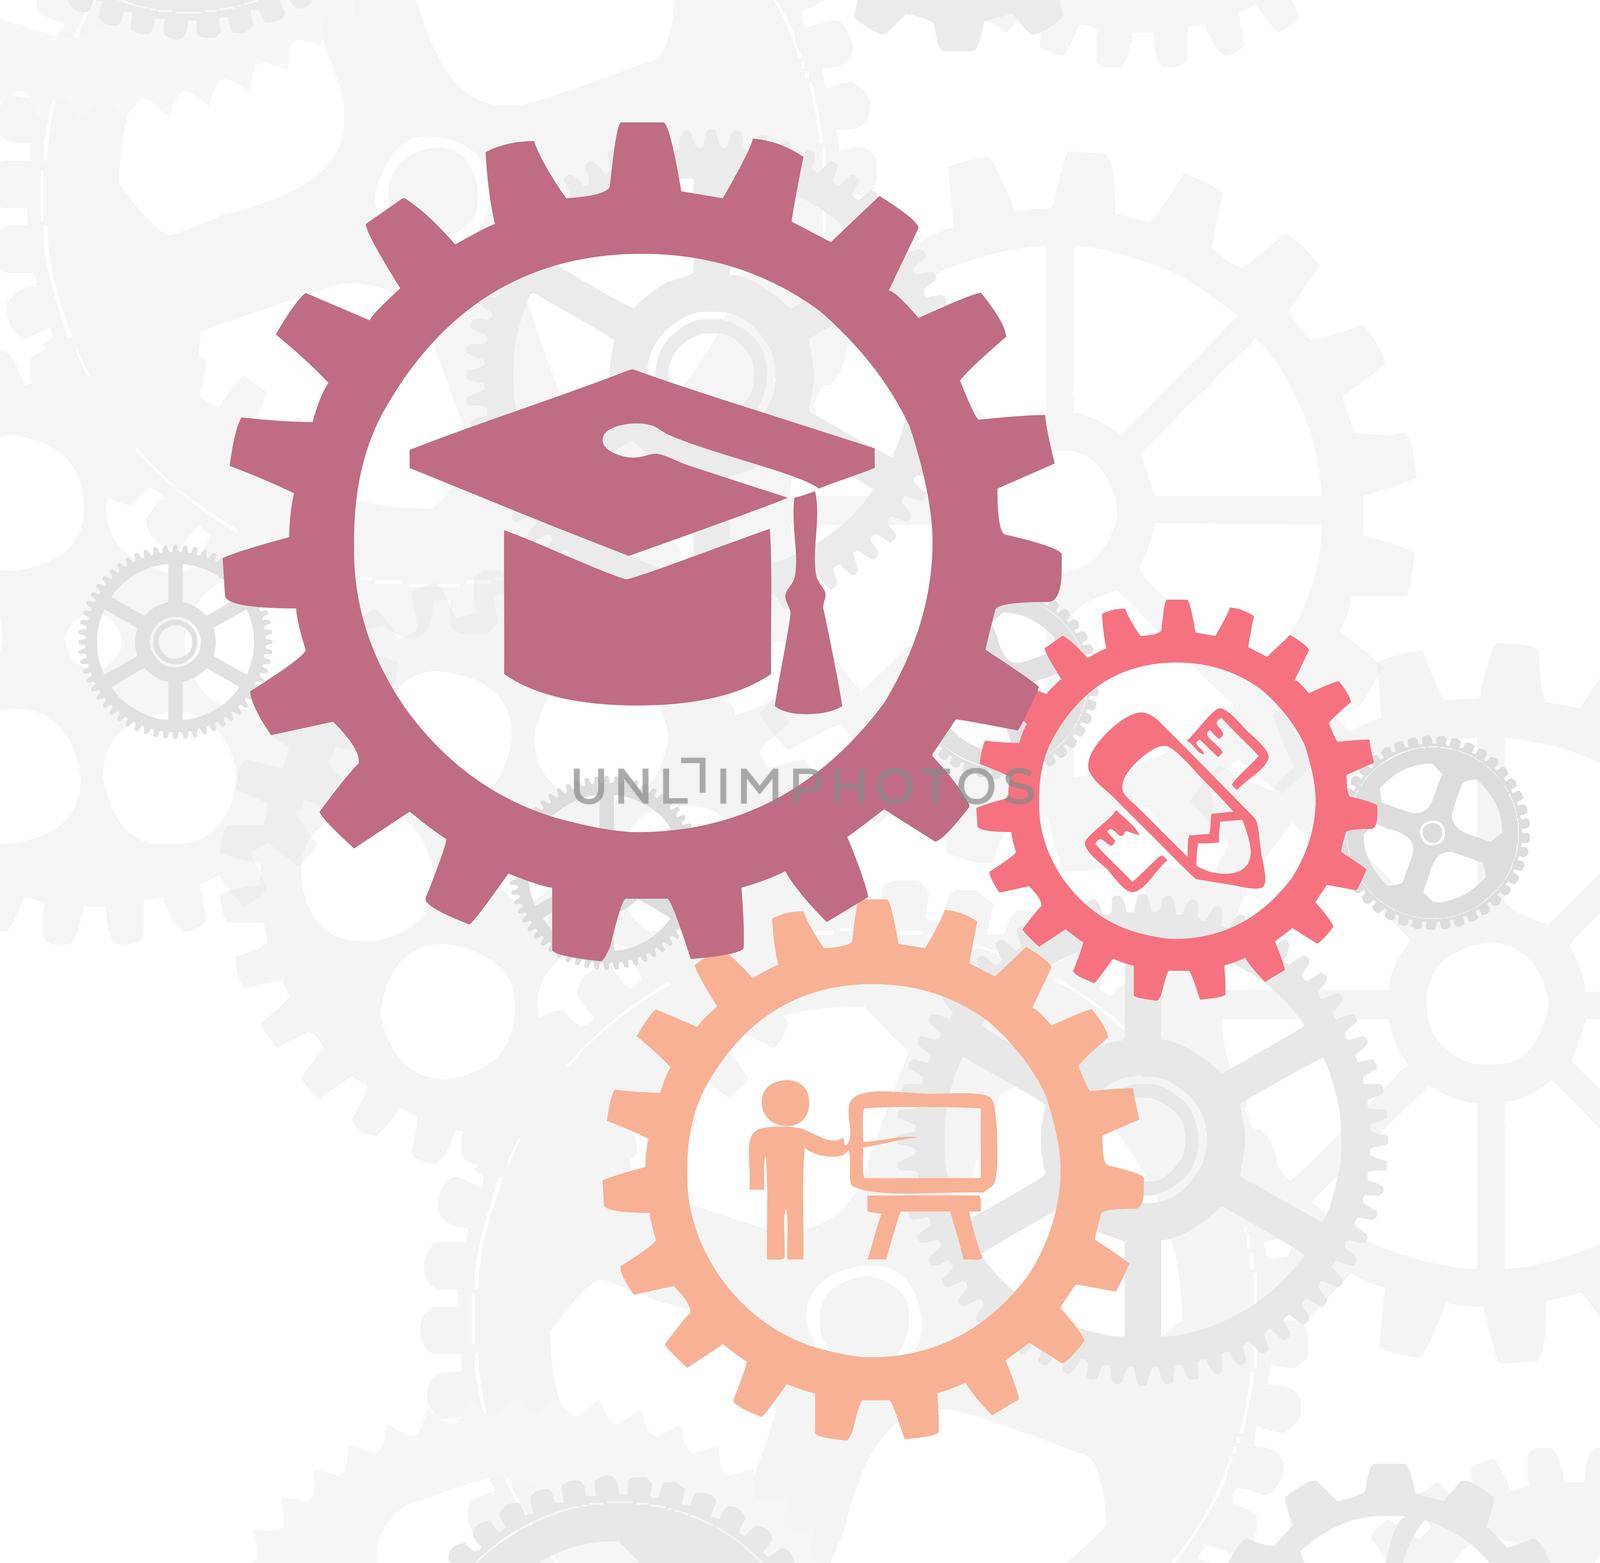 An education concept with gears, related with university and work, industrial education, clipart, education related illustration, graduation, diploma by mrceviz